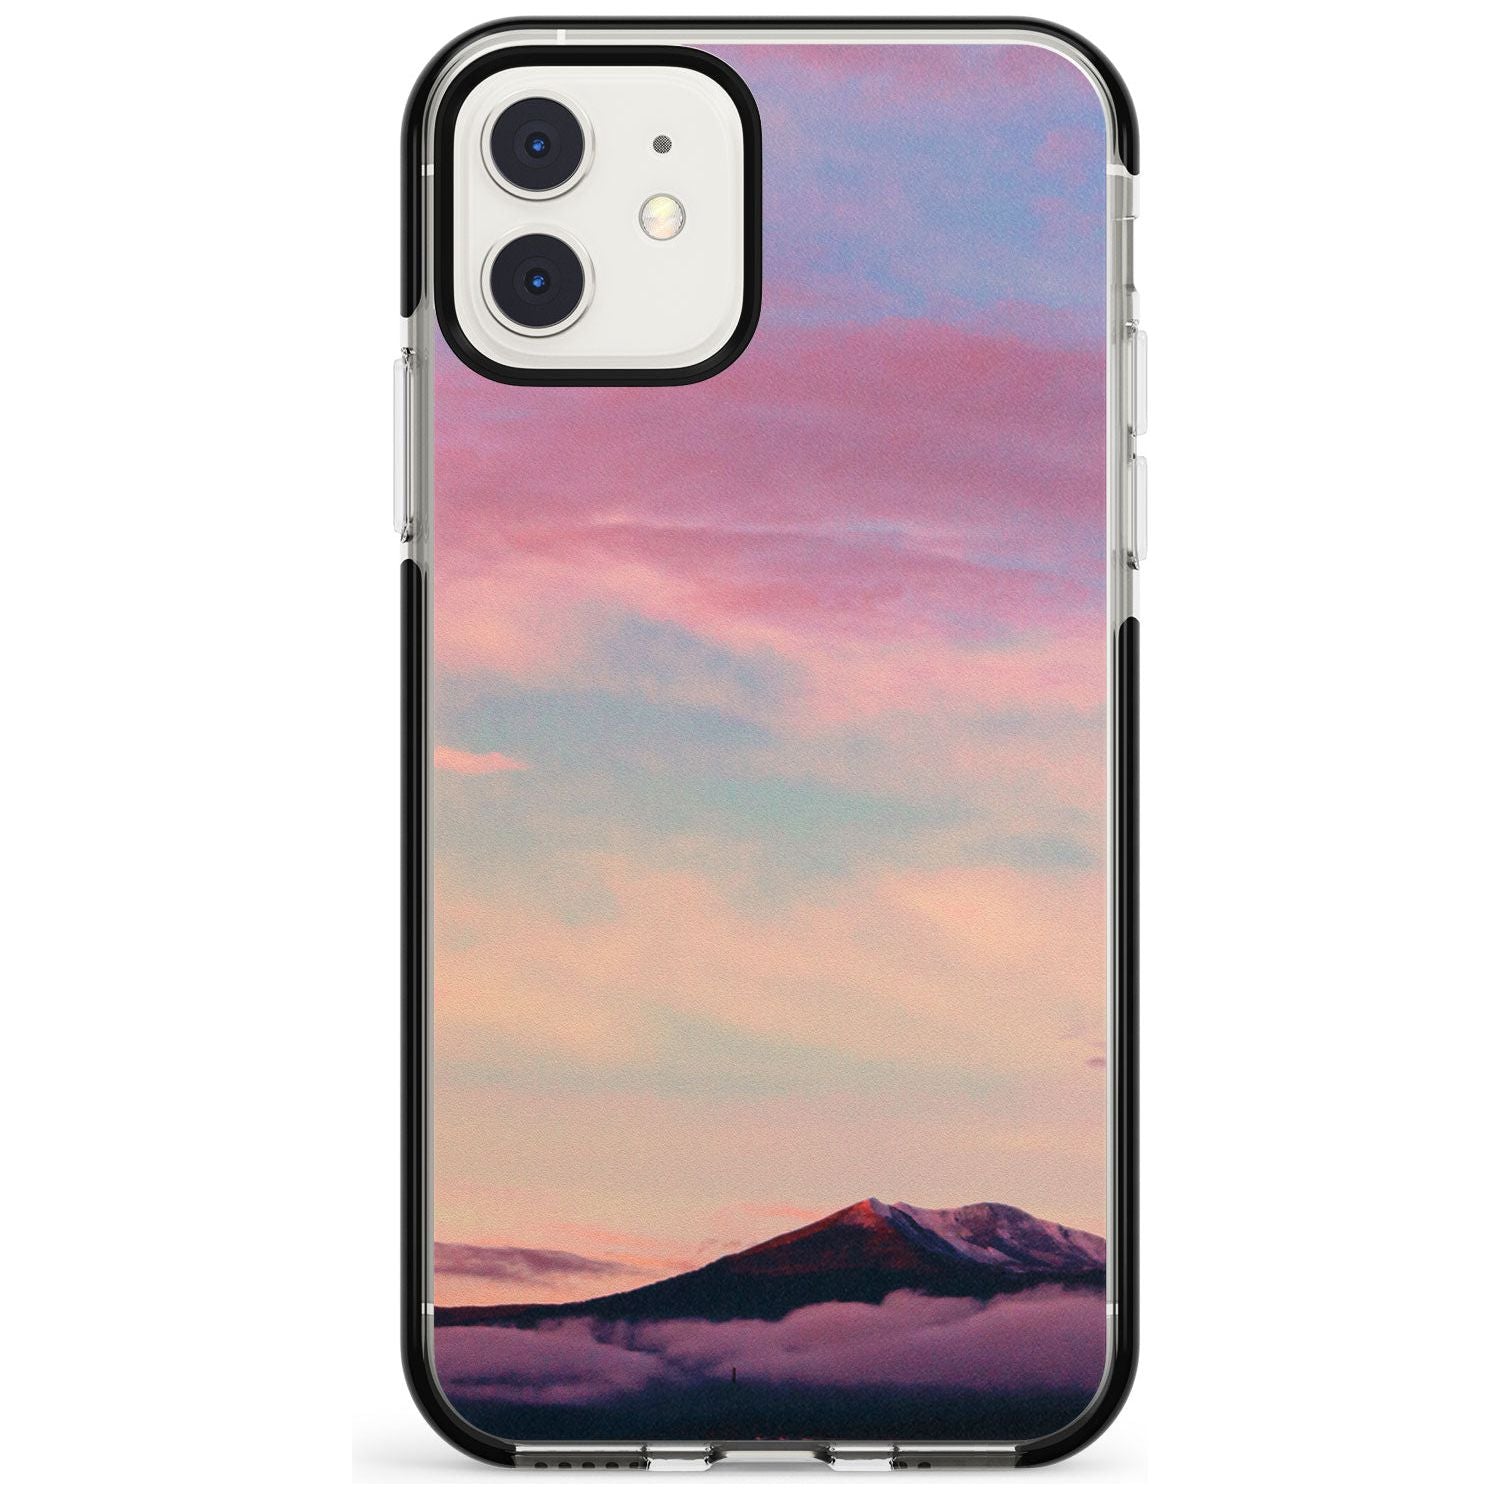 Cloudy Sunset Photograph Black Impact Phone Case for iPhone 11